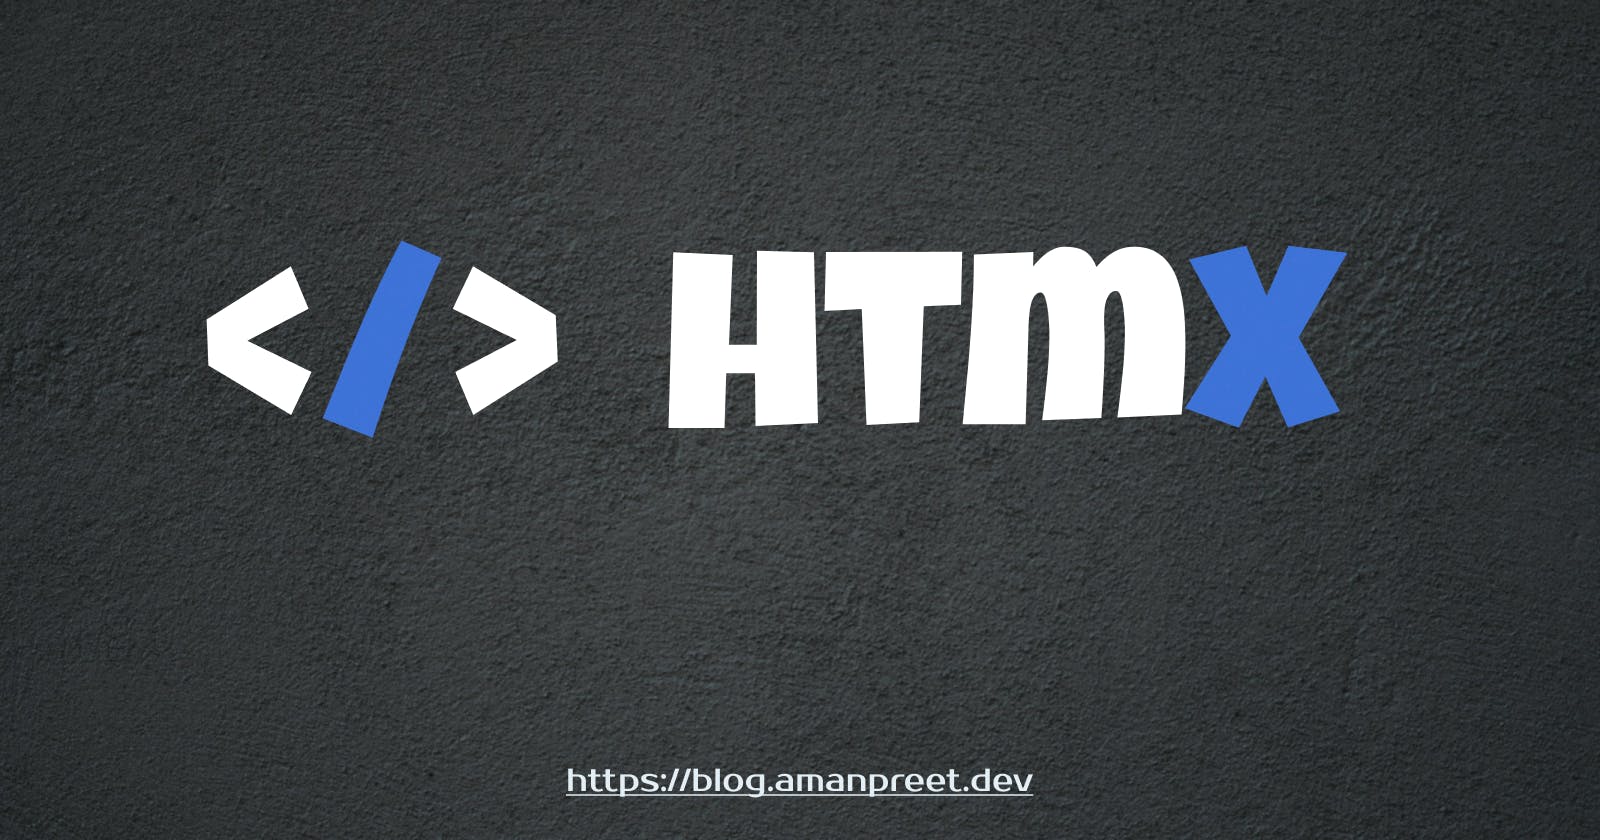 Why Every Web Developer Should Know HTMX?